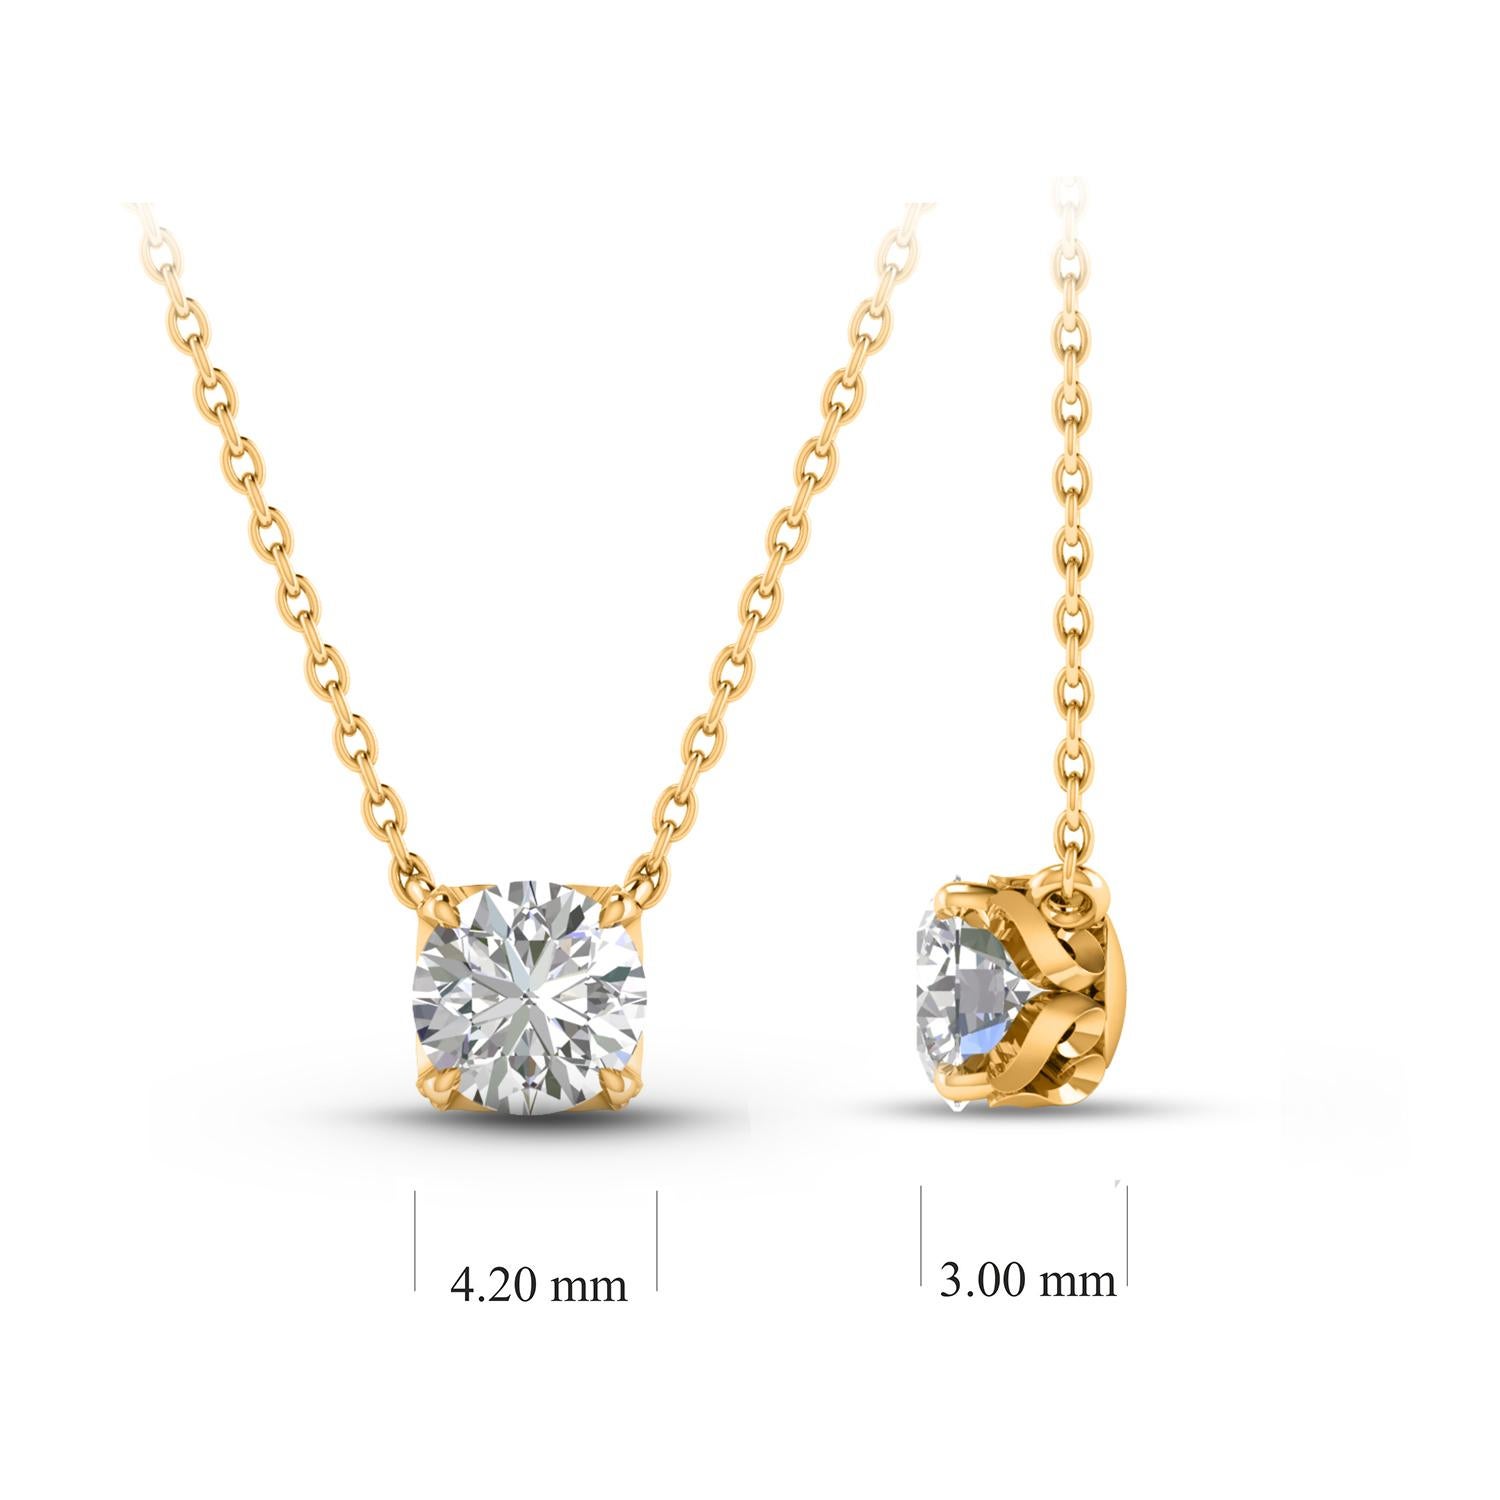 Contemporary HARAKH GIA Certified 0.26 Carat Solitaire Diamond Pendant Necklace in 18 KT Gold For Sale